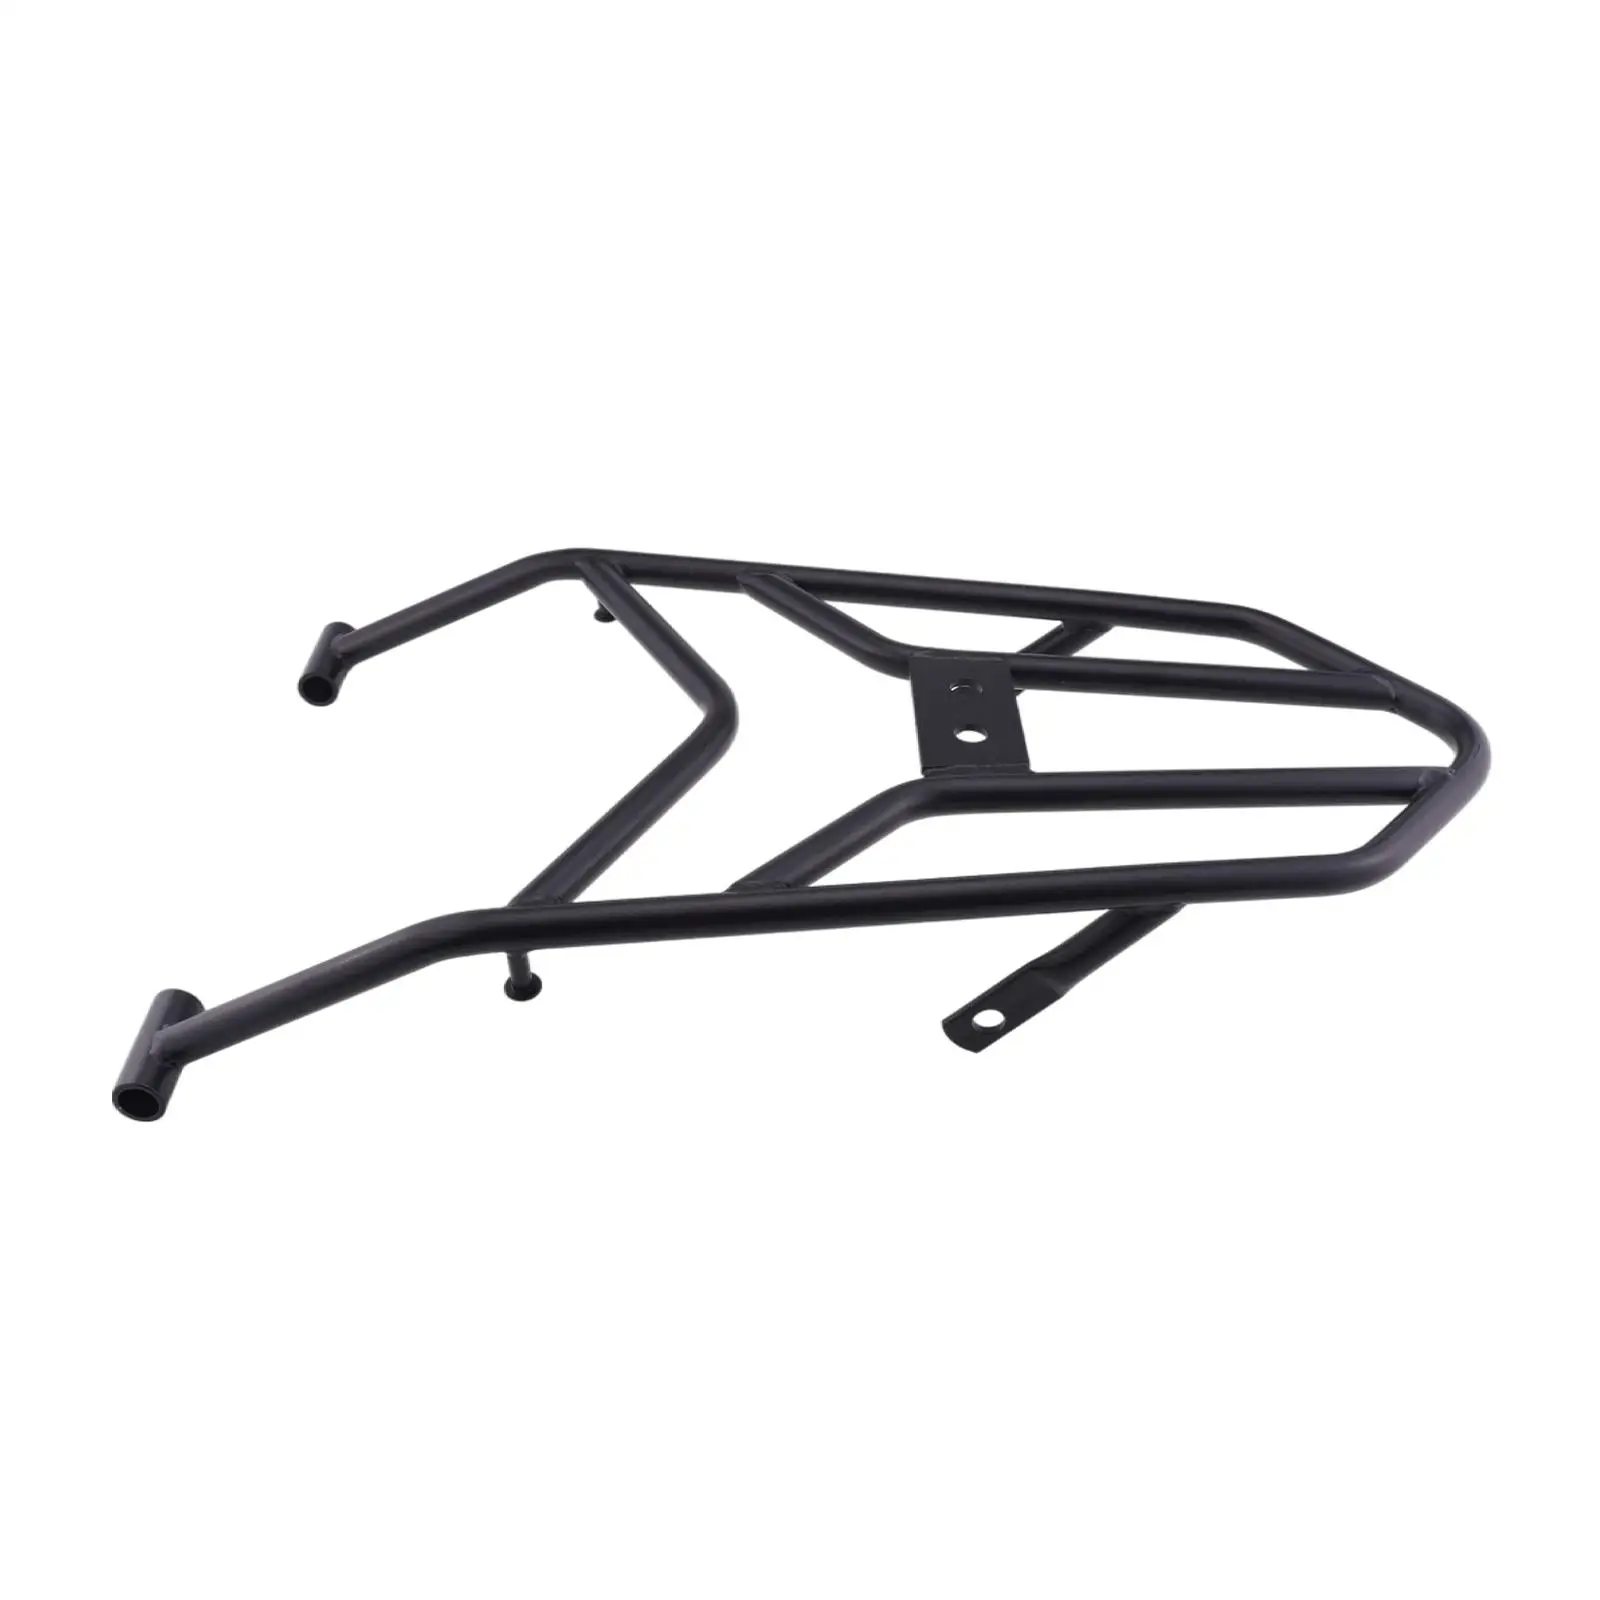 Motorcycle Rear Tail Rack Black Luggage Racks Fits for  Crf250300L